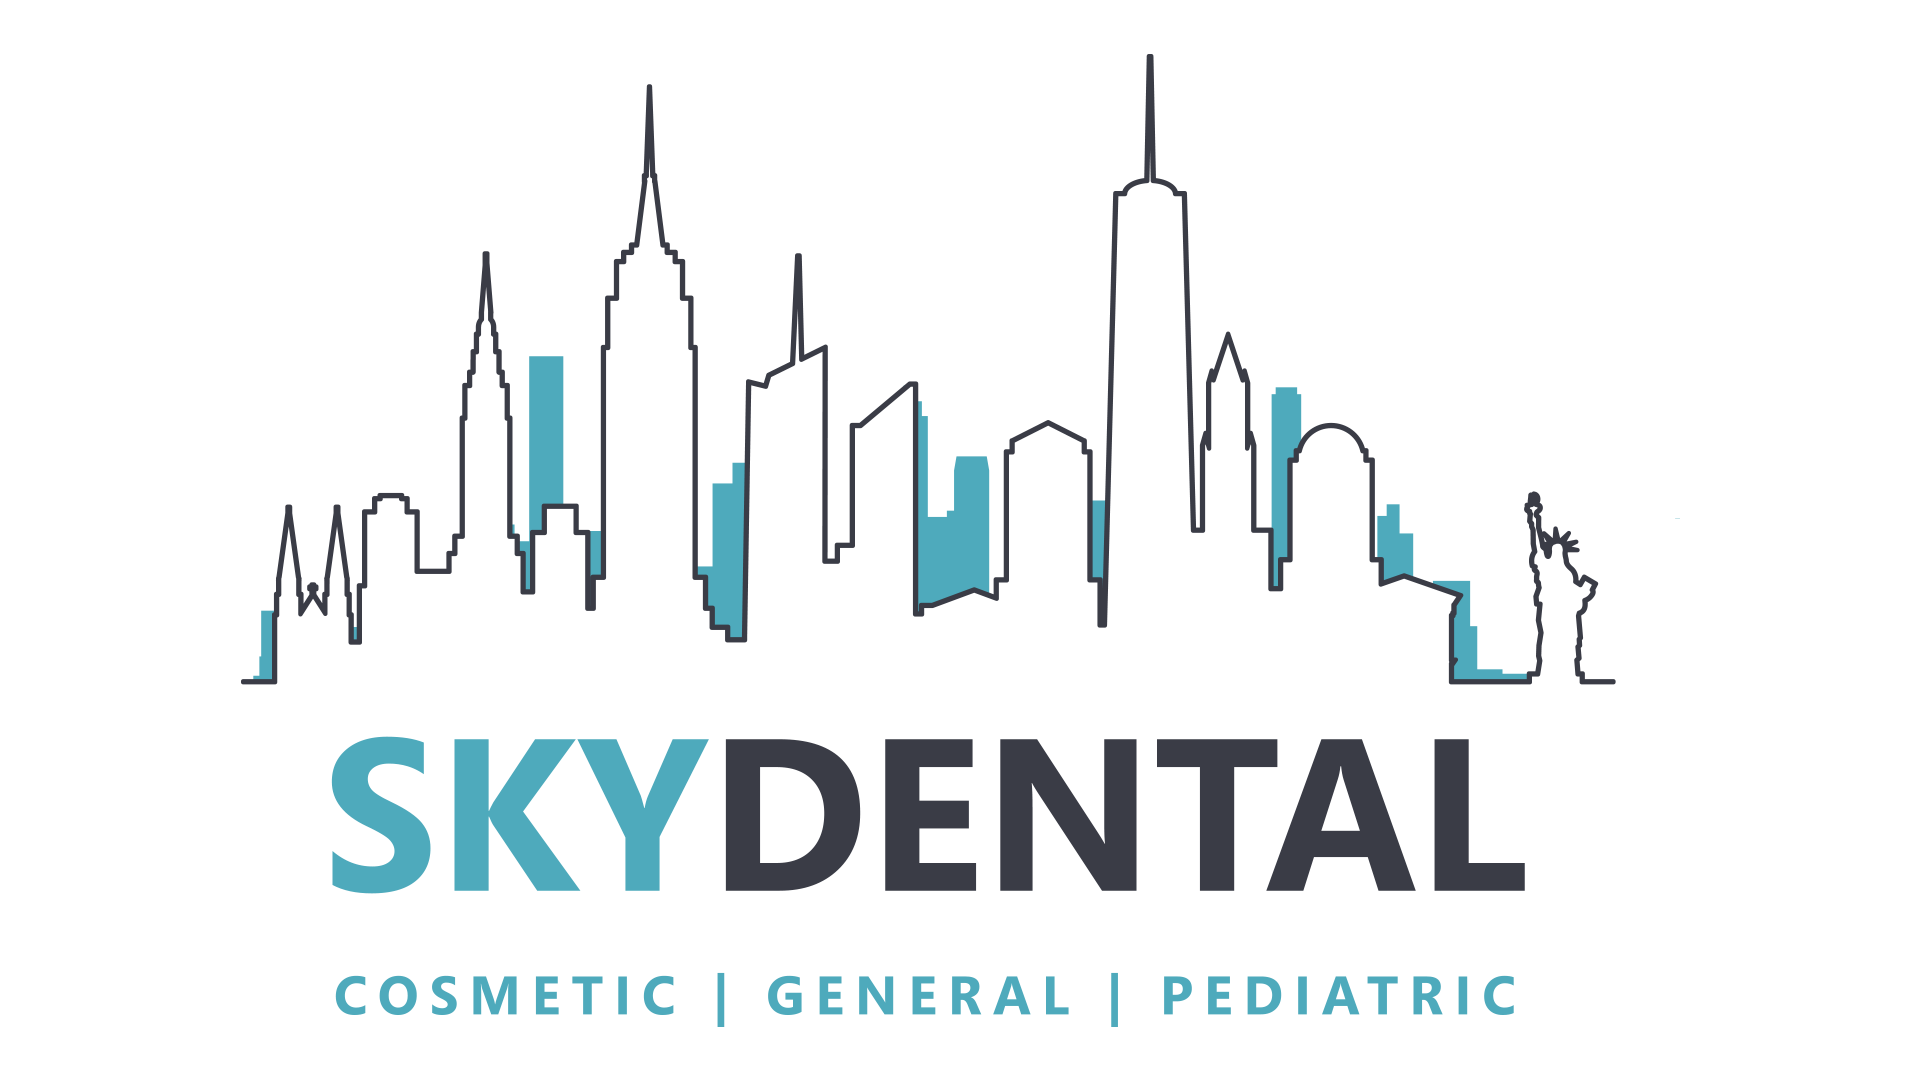 Sky Dental NYC - Cosmetic, General, and Pediatric Dental Office Located In NYC